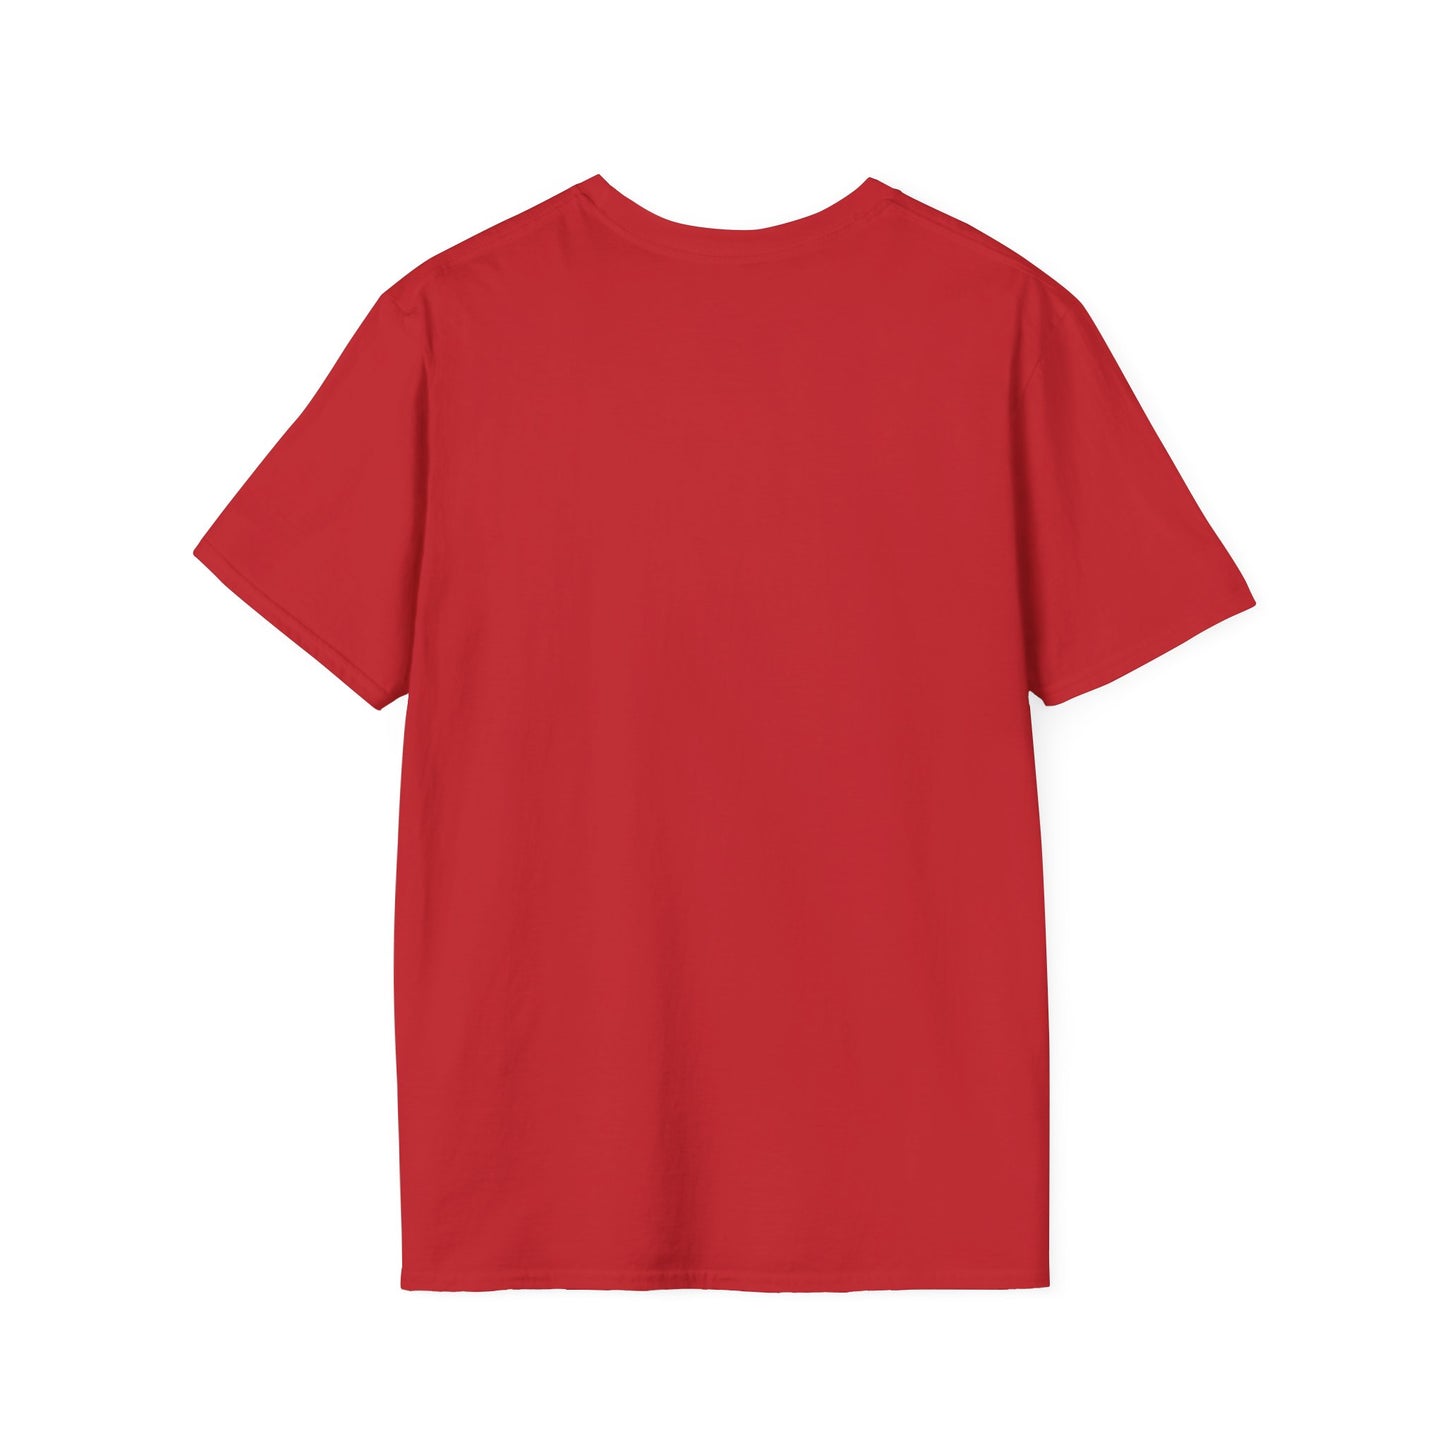 Limited Existence RED Unisex Soft-Style T-shirt